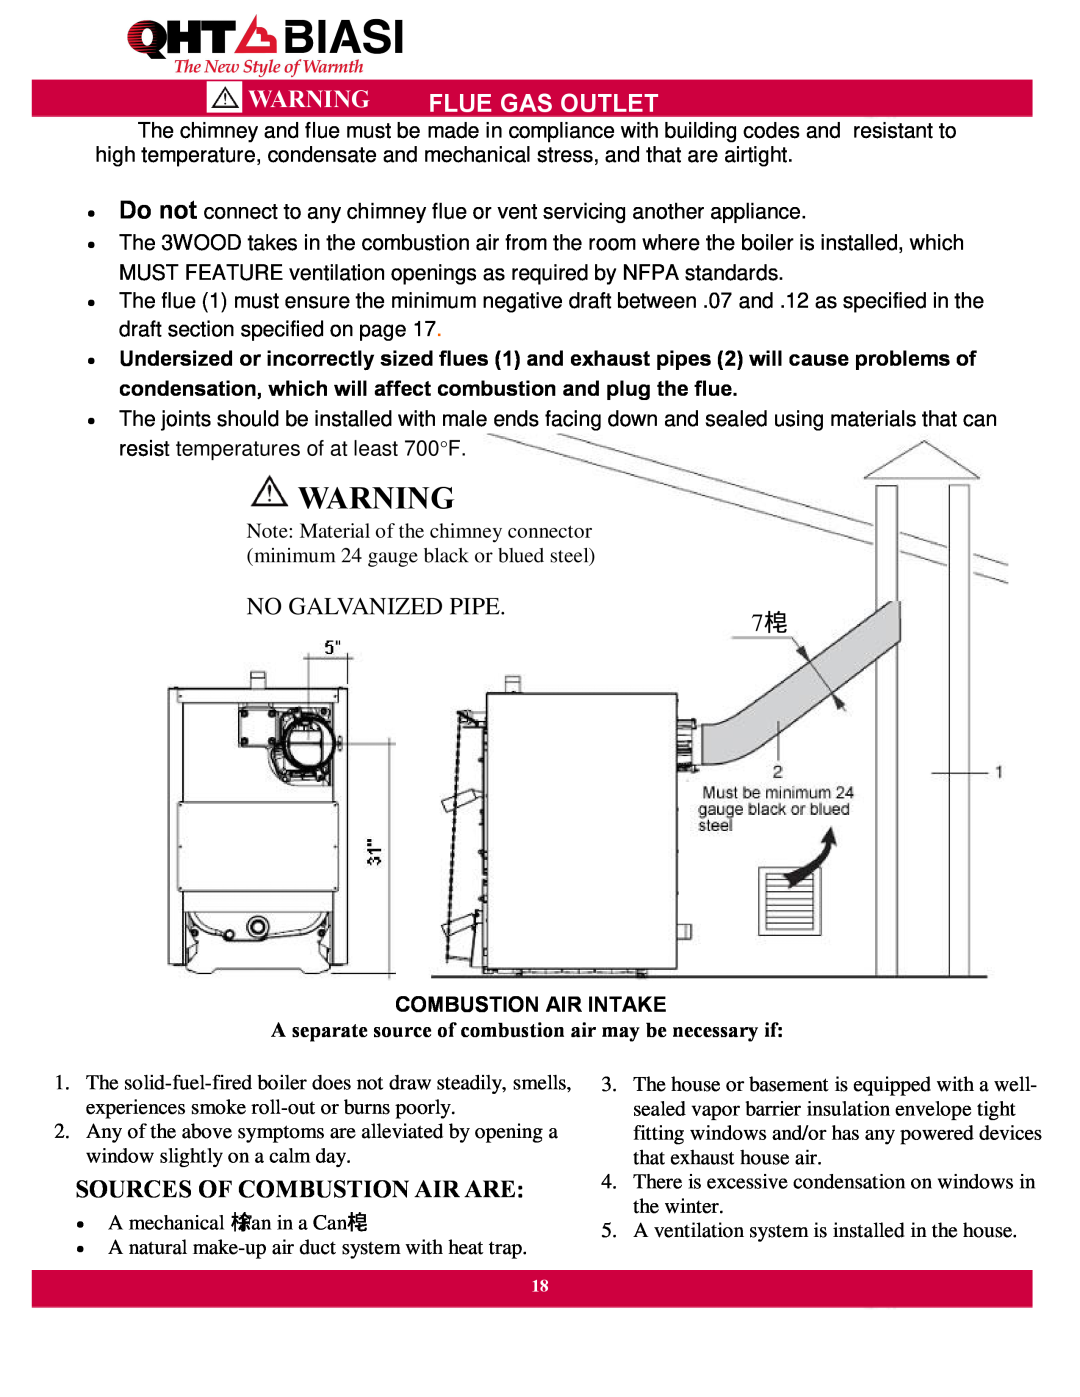 QHT Boiler manual No Galvanized Pipe, Sources Of Combustion Air Are, Flue Gas Outlet, Combustion Air Intake 